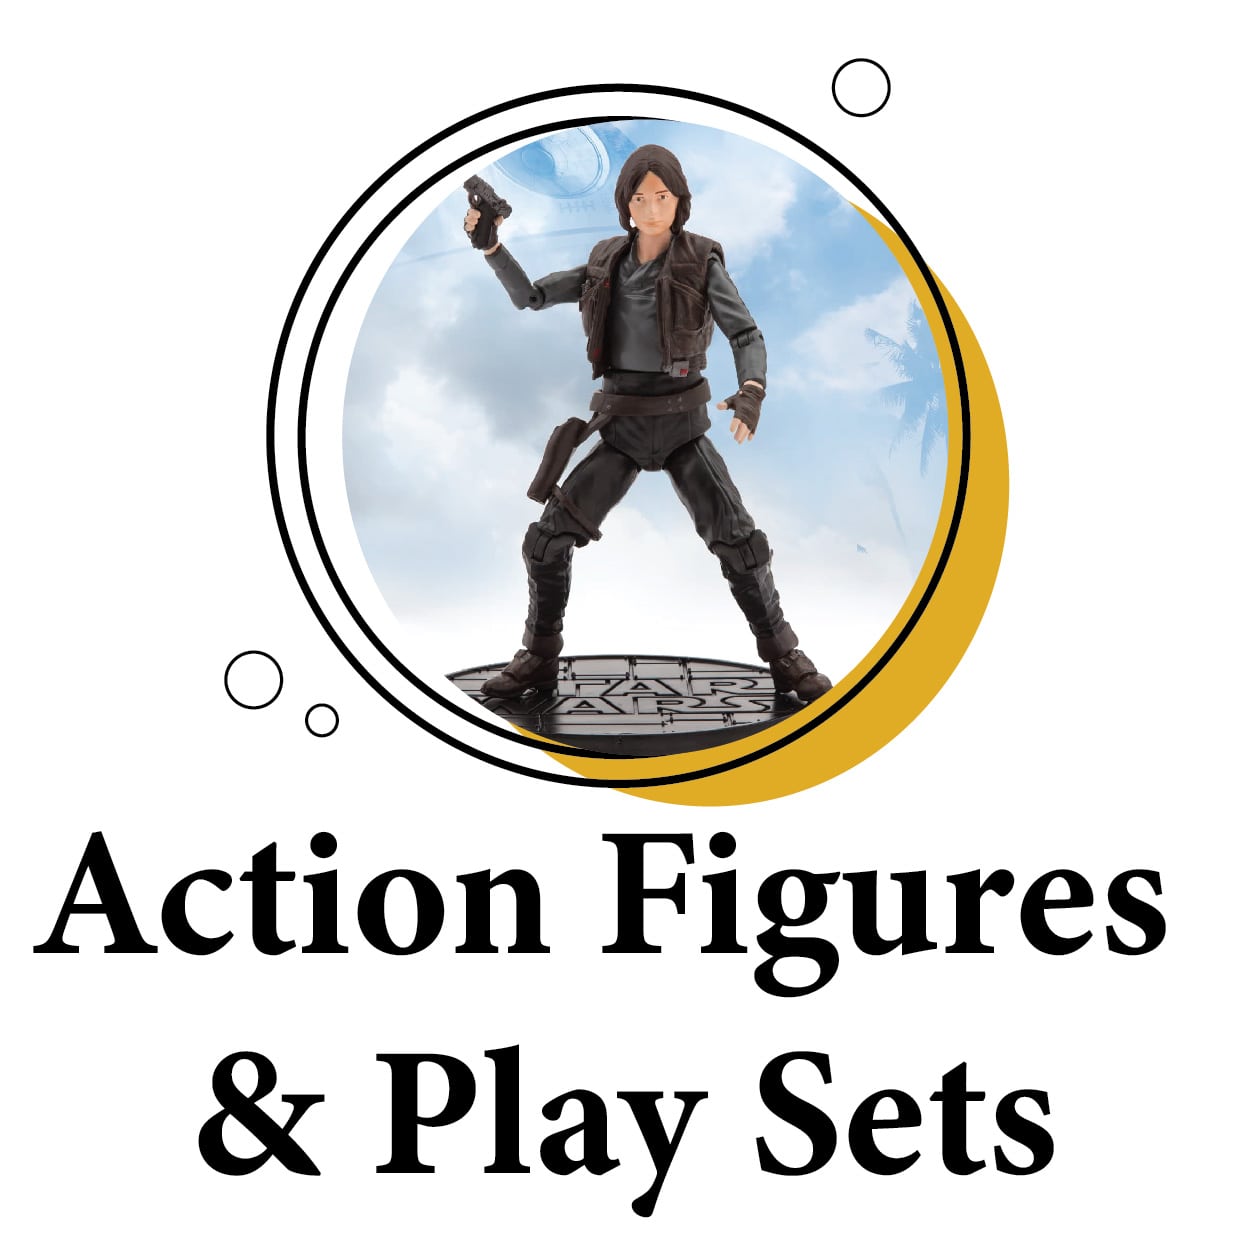 Action Figures & Play Sets